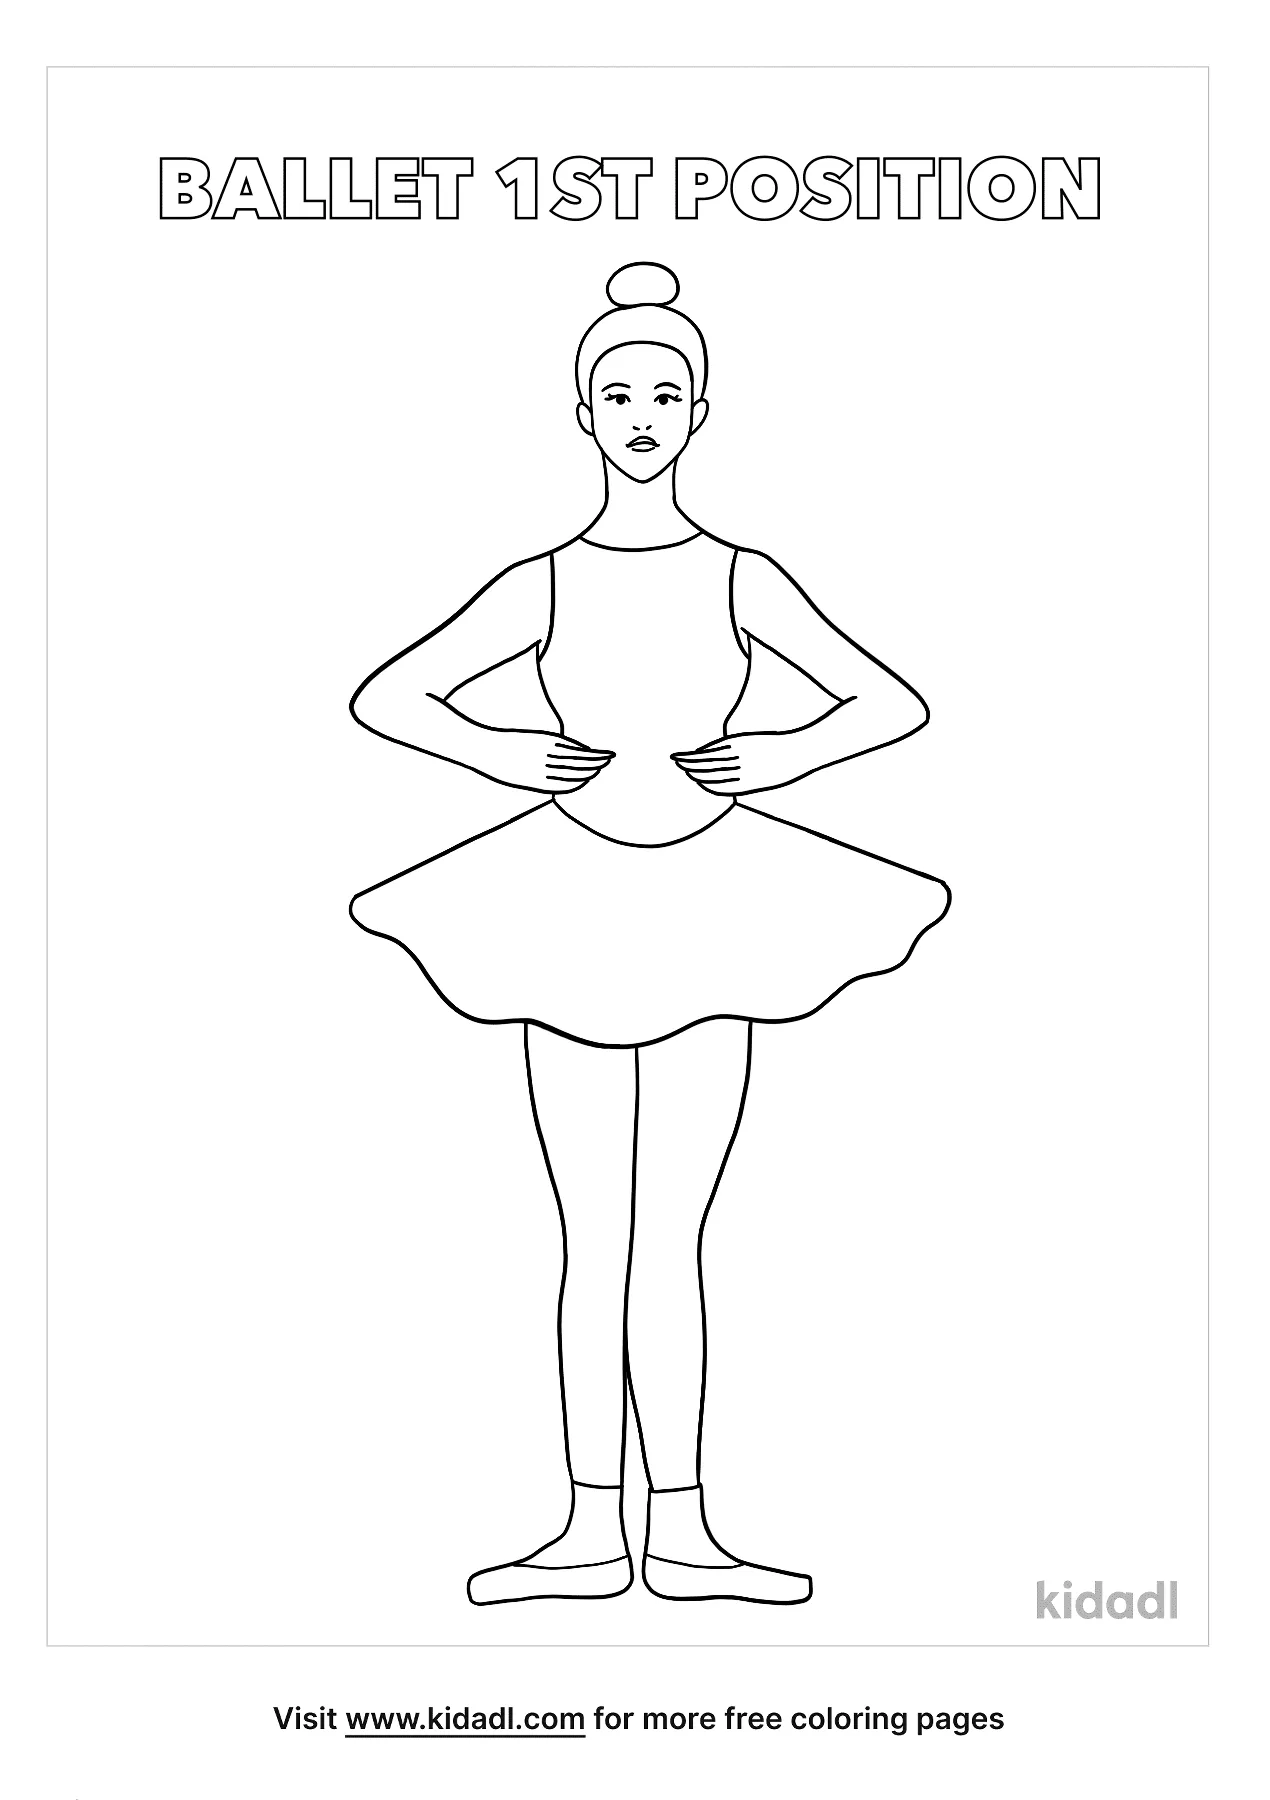 Free ballet st position coloring page coloring page printables